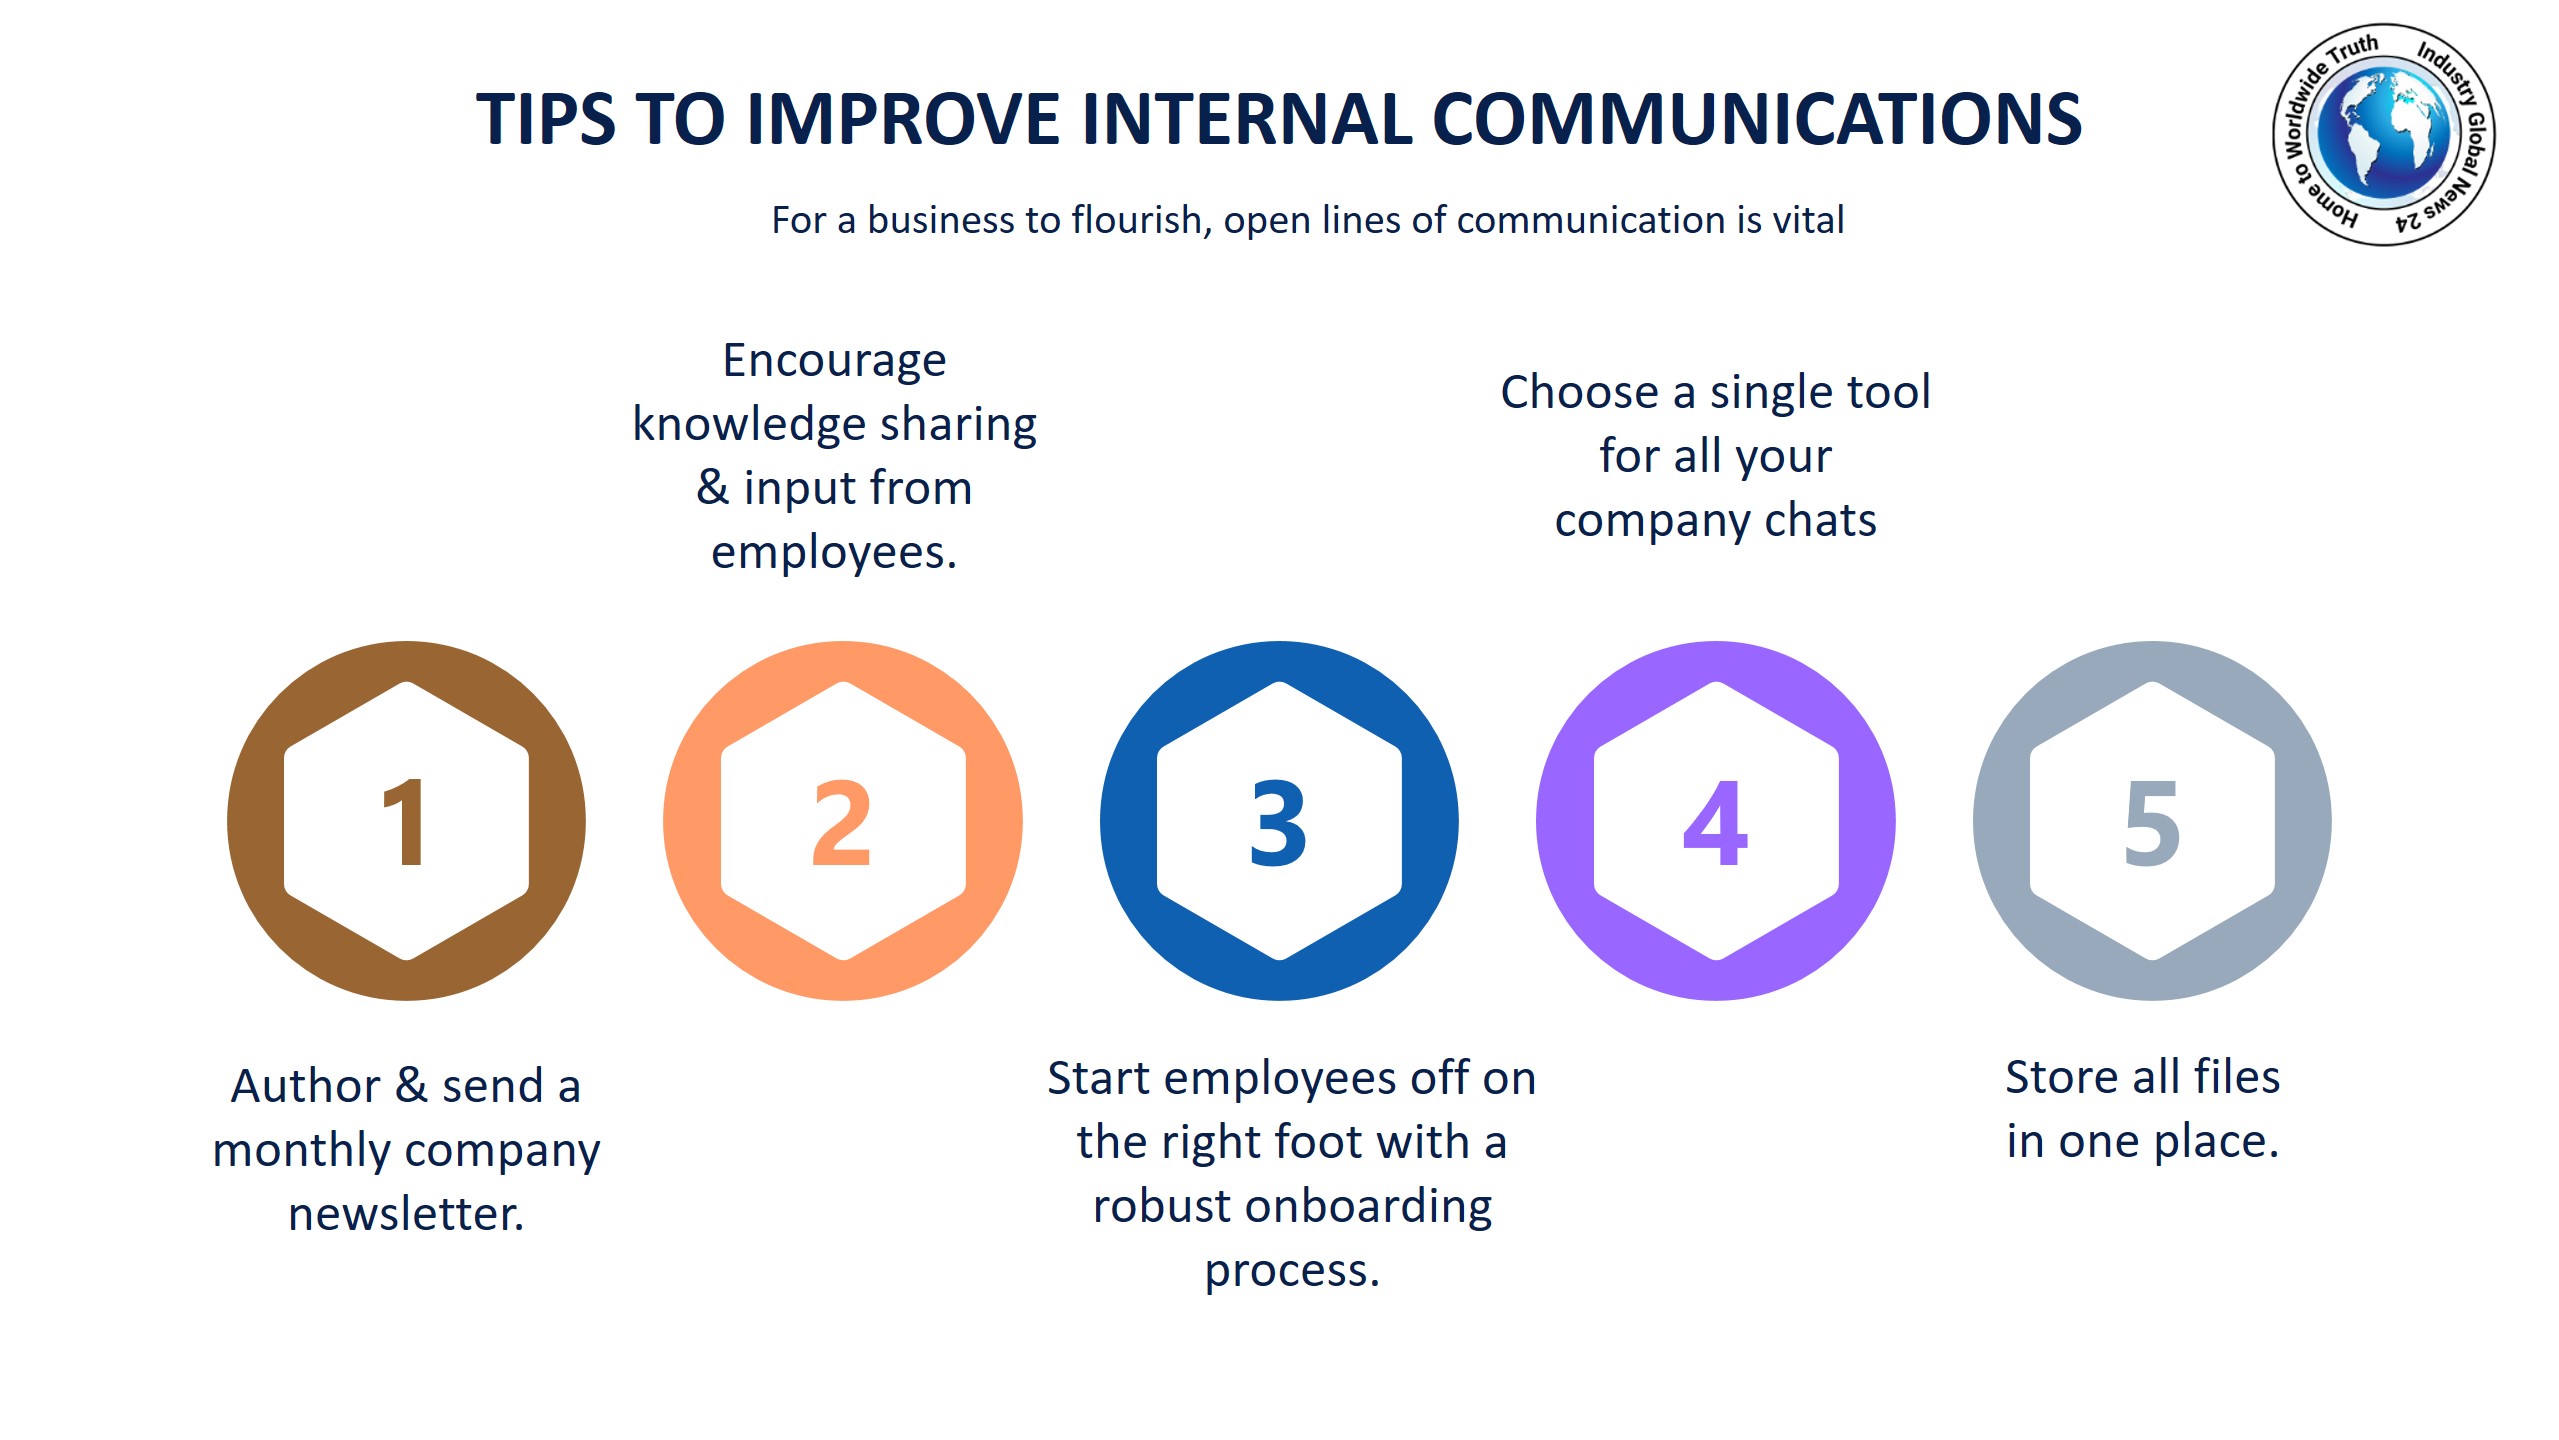 Tips to improve internal communications